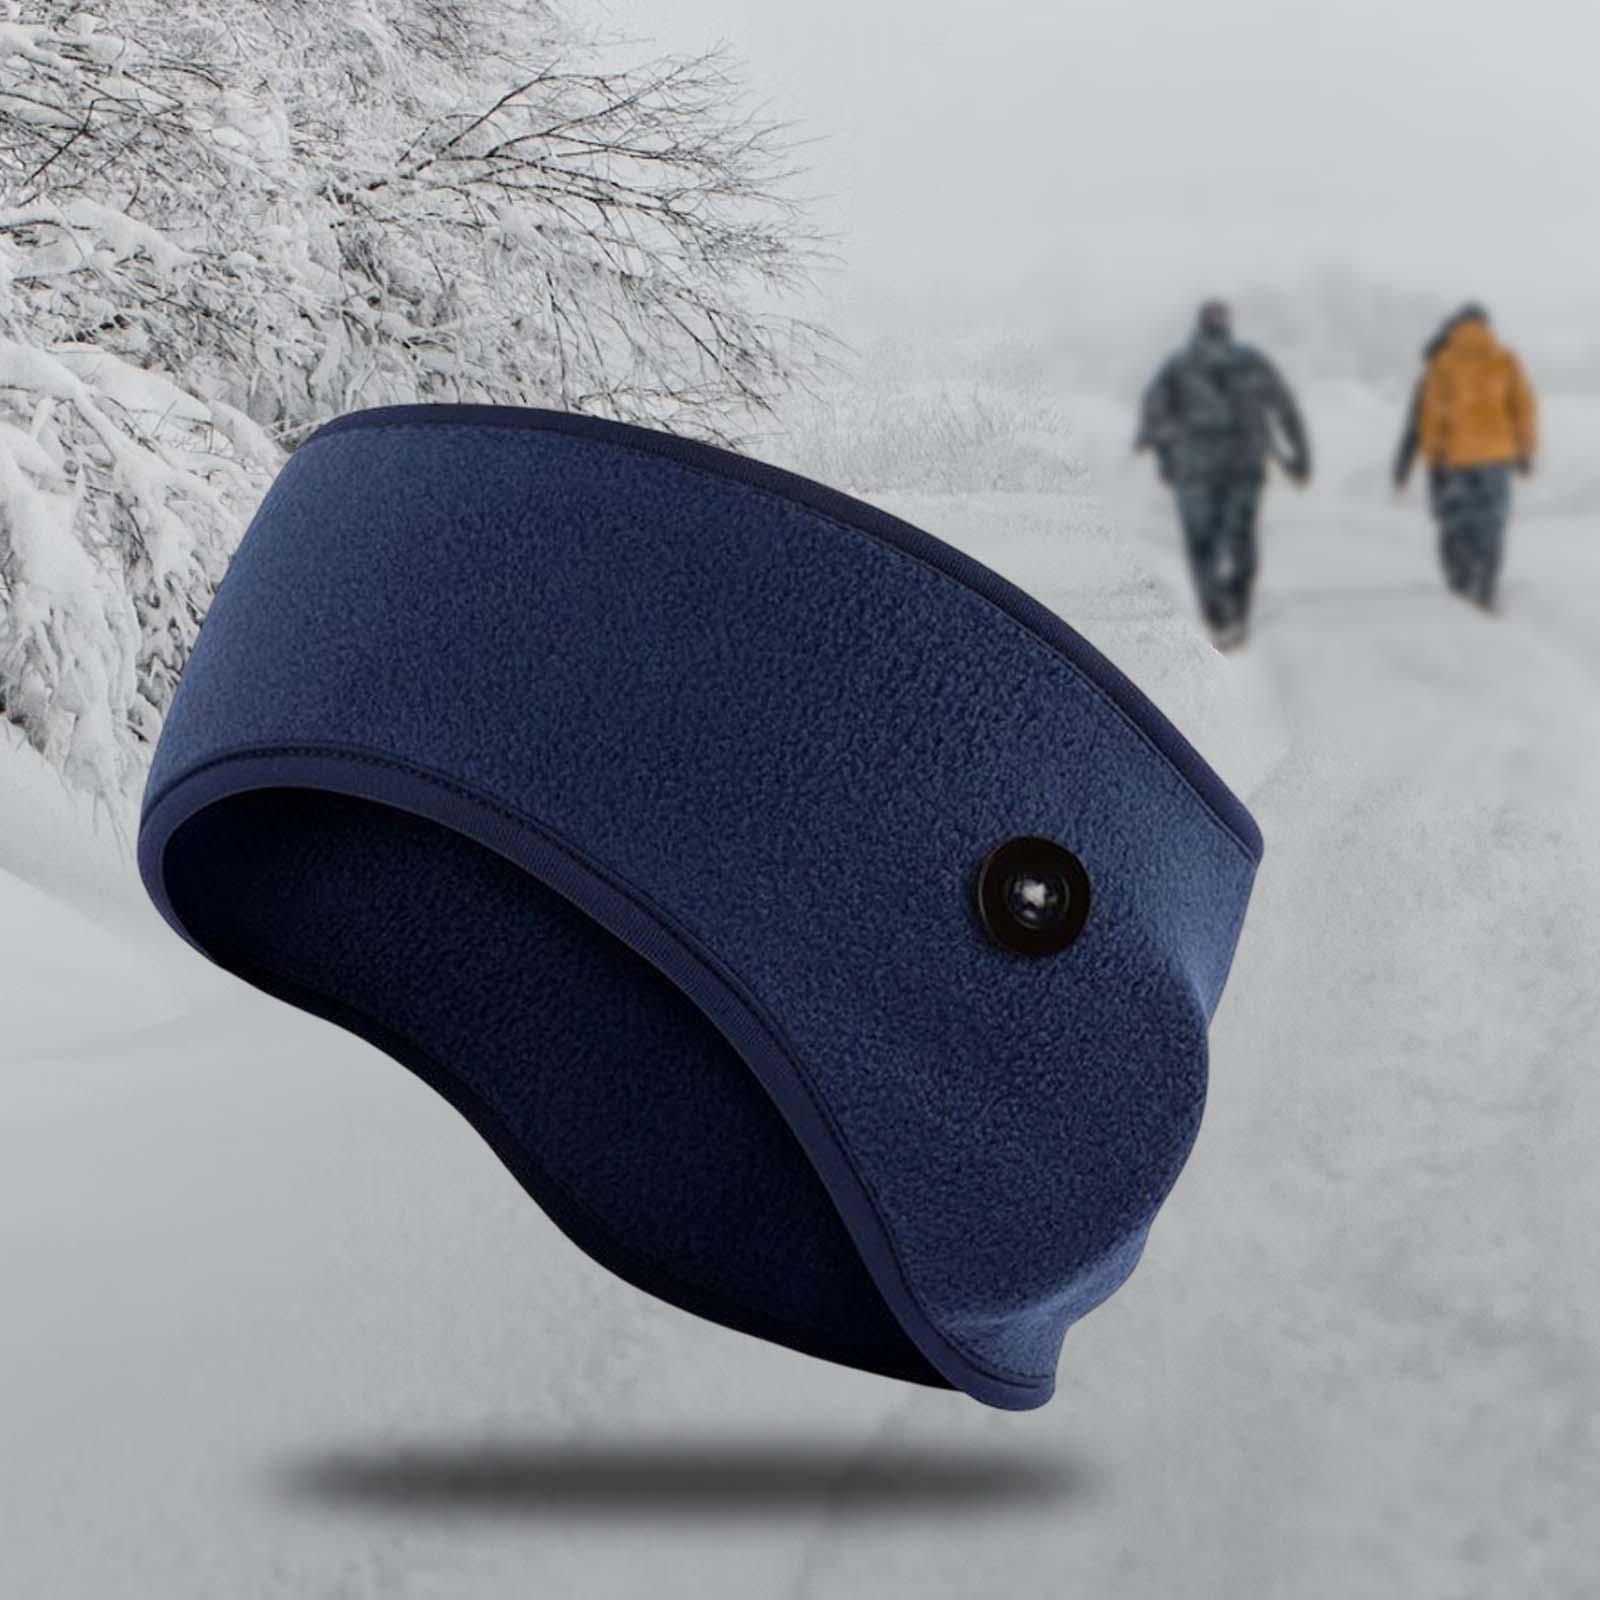 Ear Warmers Headband with Buttons Winter Earmuffs for Adults Cycling Skiing Dark Blue